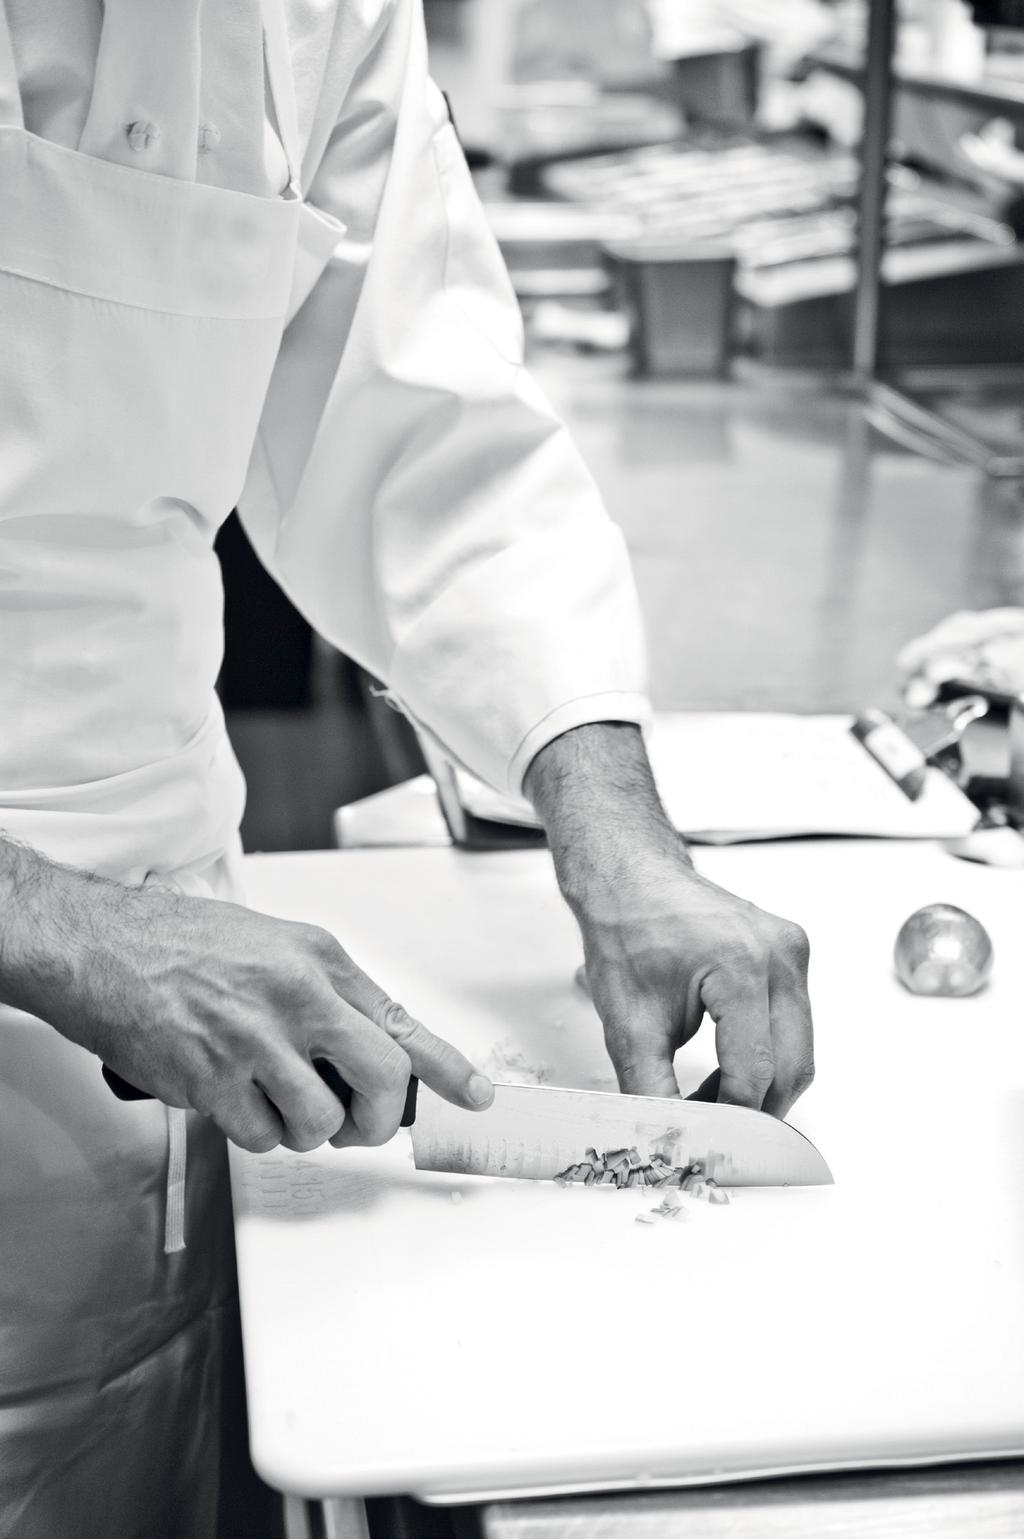 Our professional experience Did you know that nearly 50% of chefs featured in the Michelin